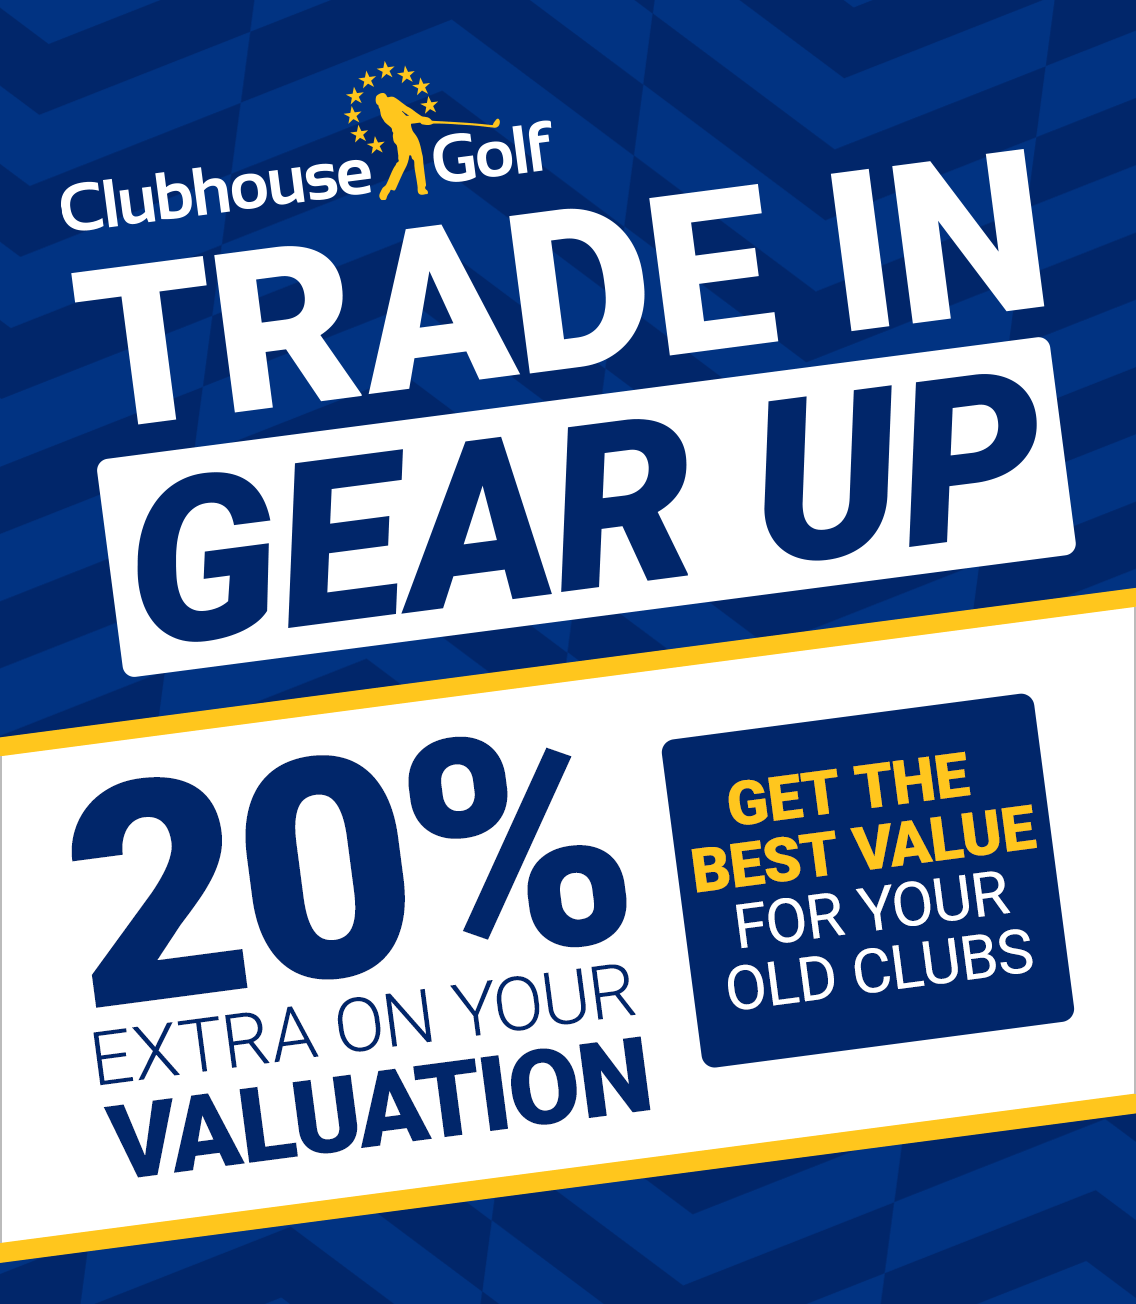 Trade In Gear Up (20% Extra On Your Valuation)